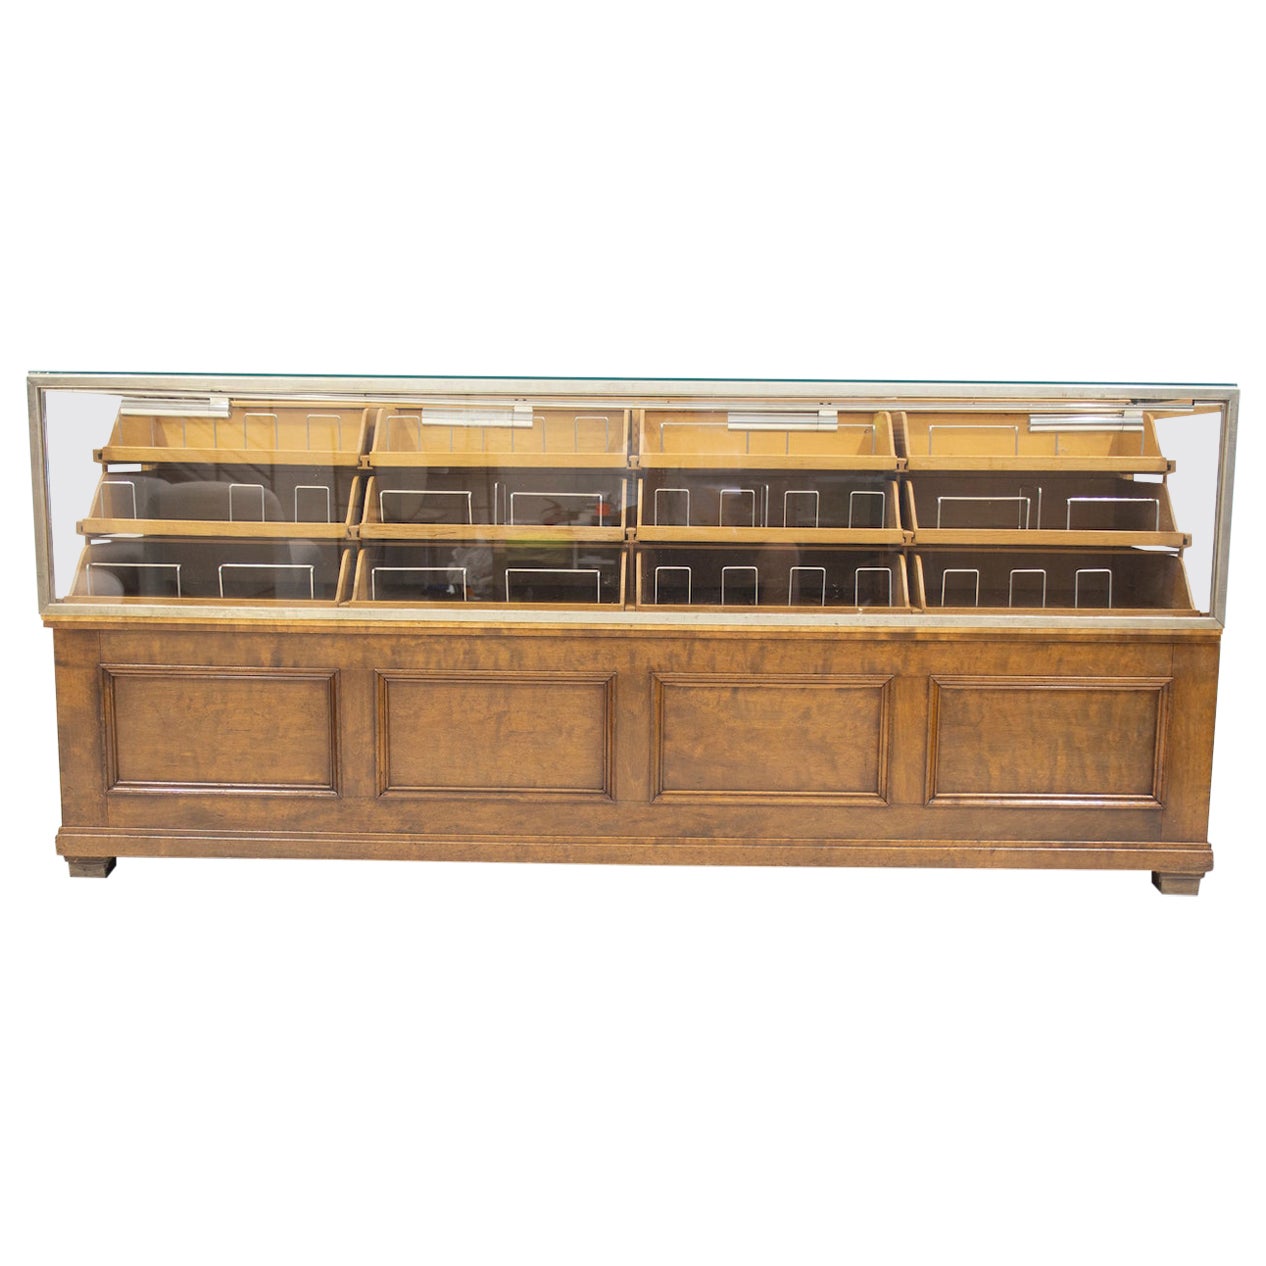 Shop Counter of Birch and Oak Wood with Twenty Drawers, 1940's For Sale